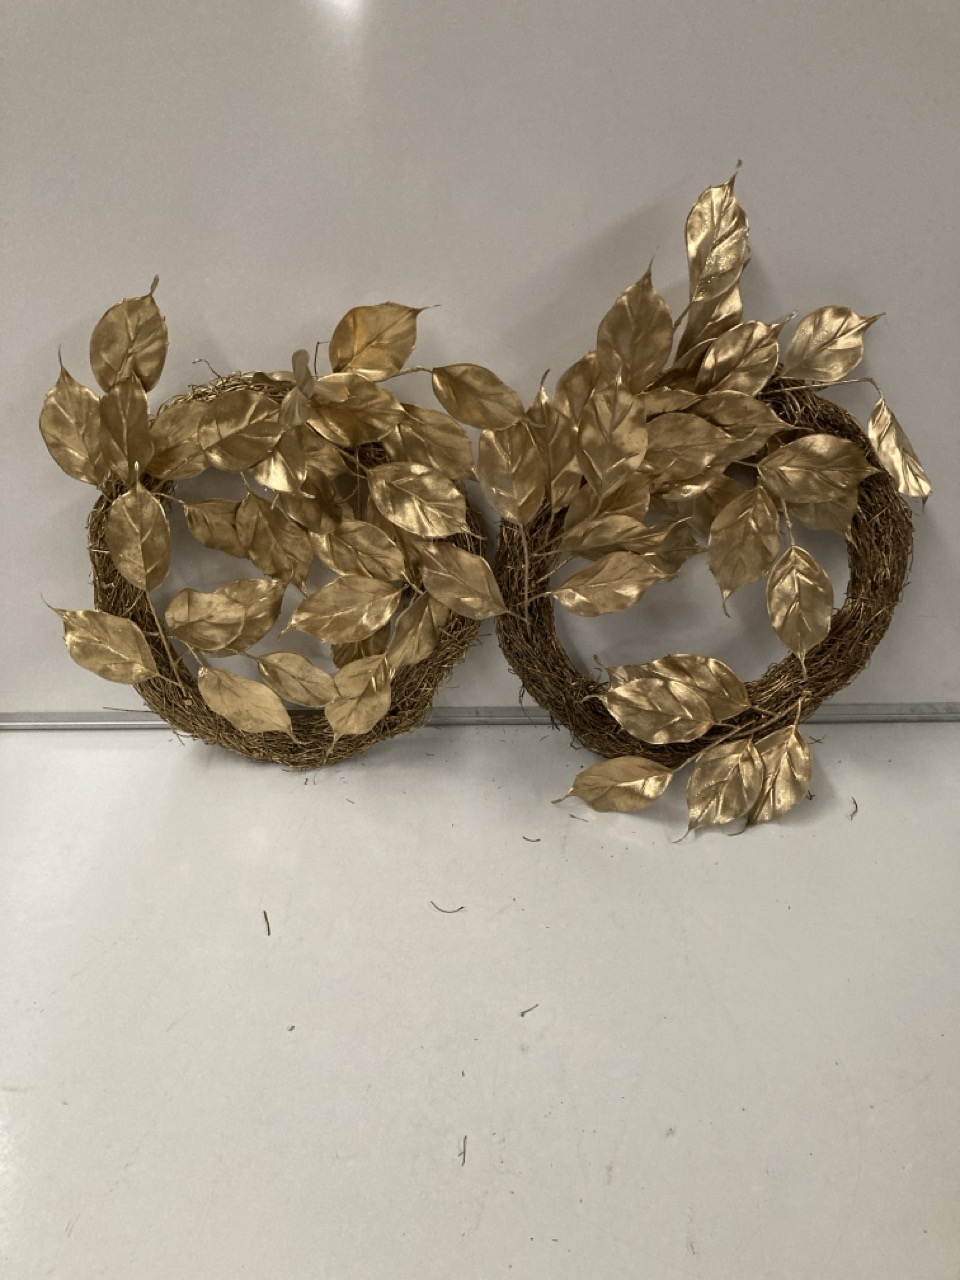 BOX OF CHRISTMAS DECORATIONS TO INCLUDE JOHN LEWIS GOLD WREATHS